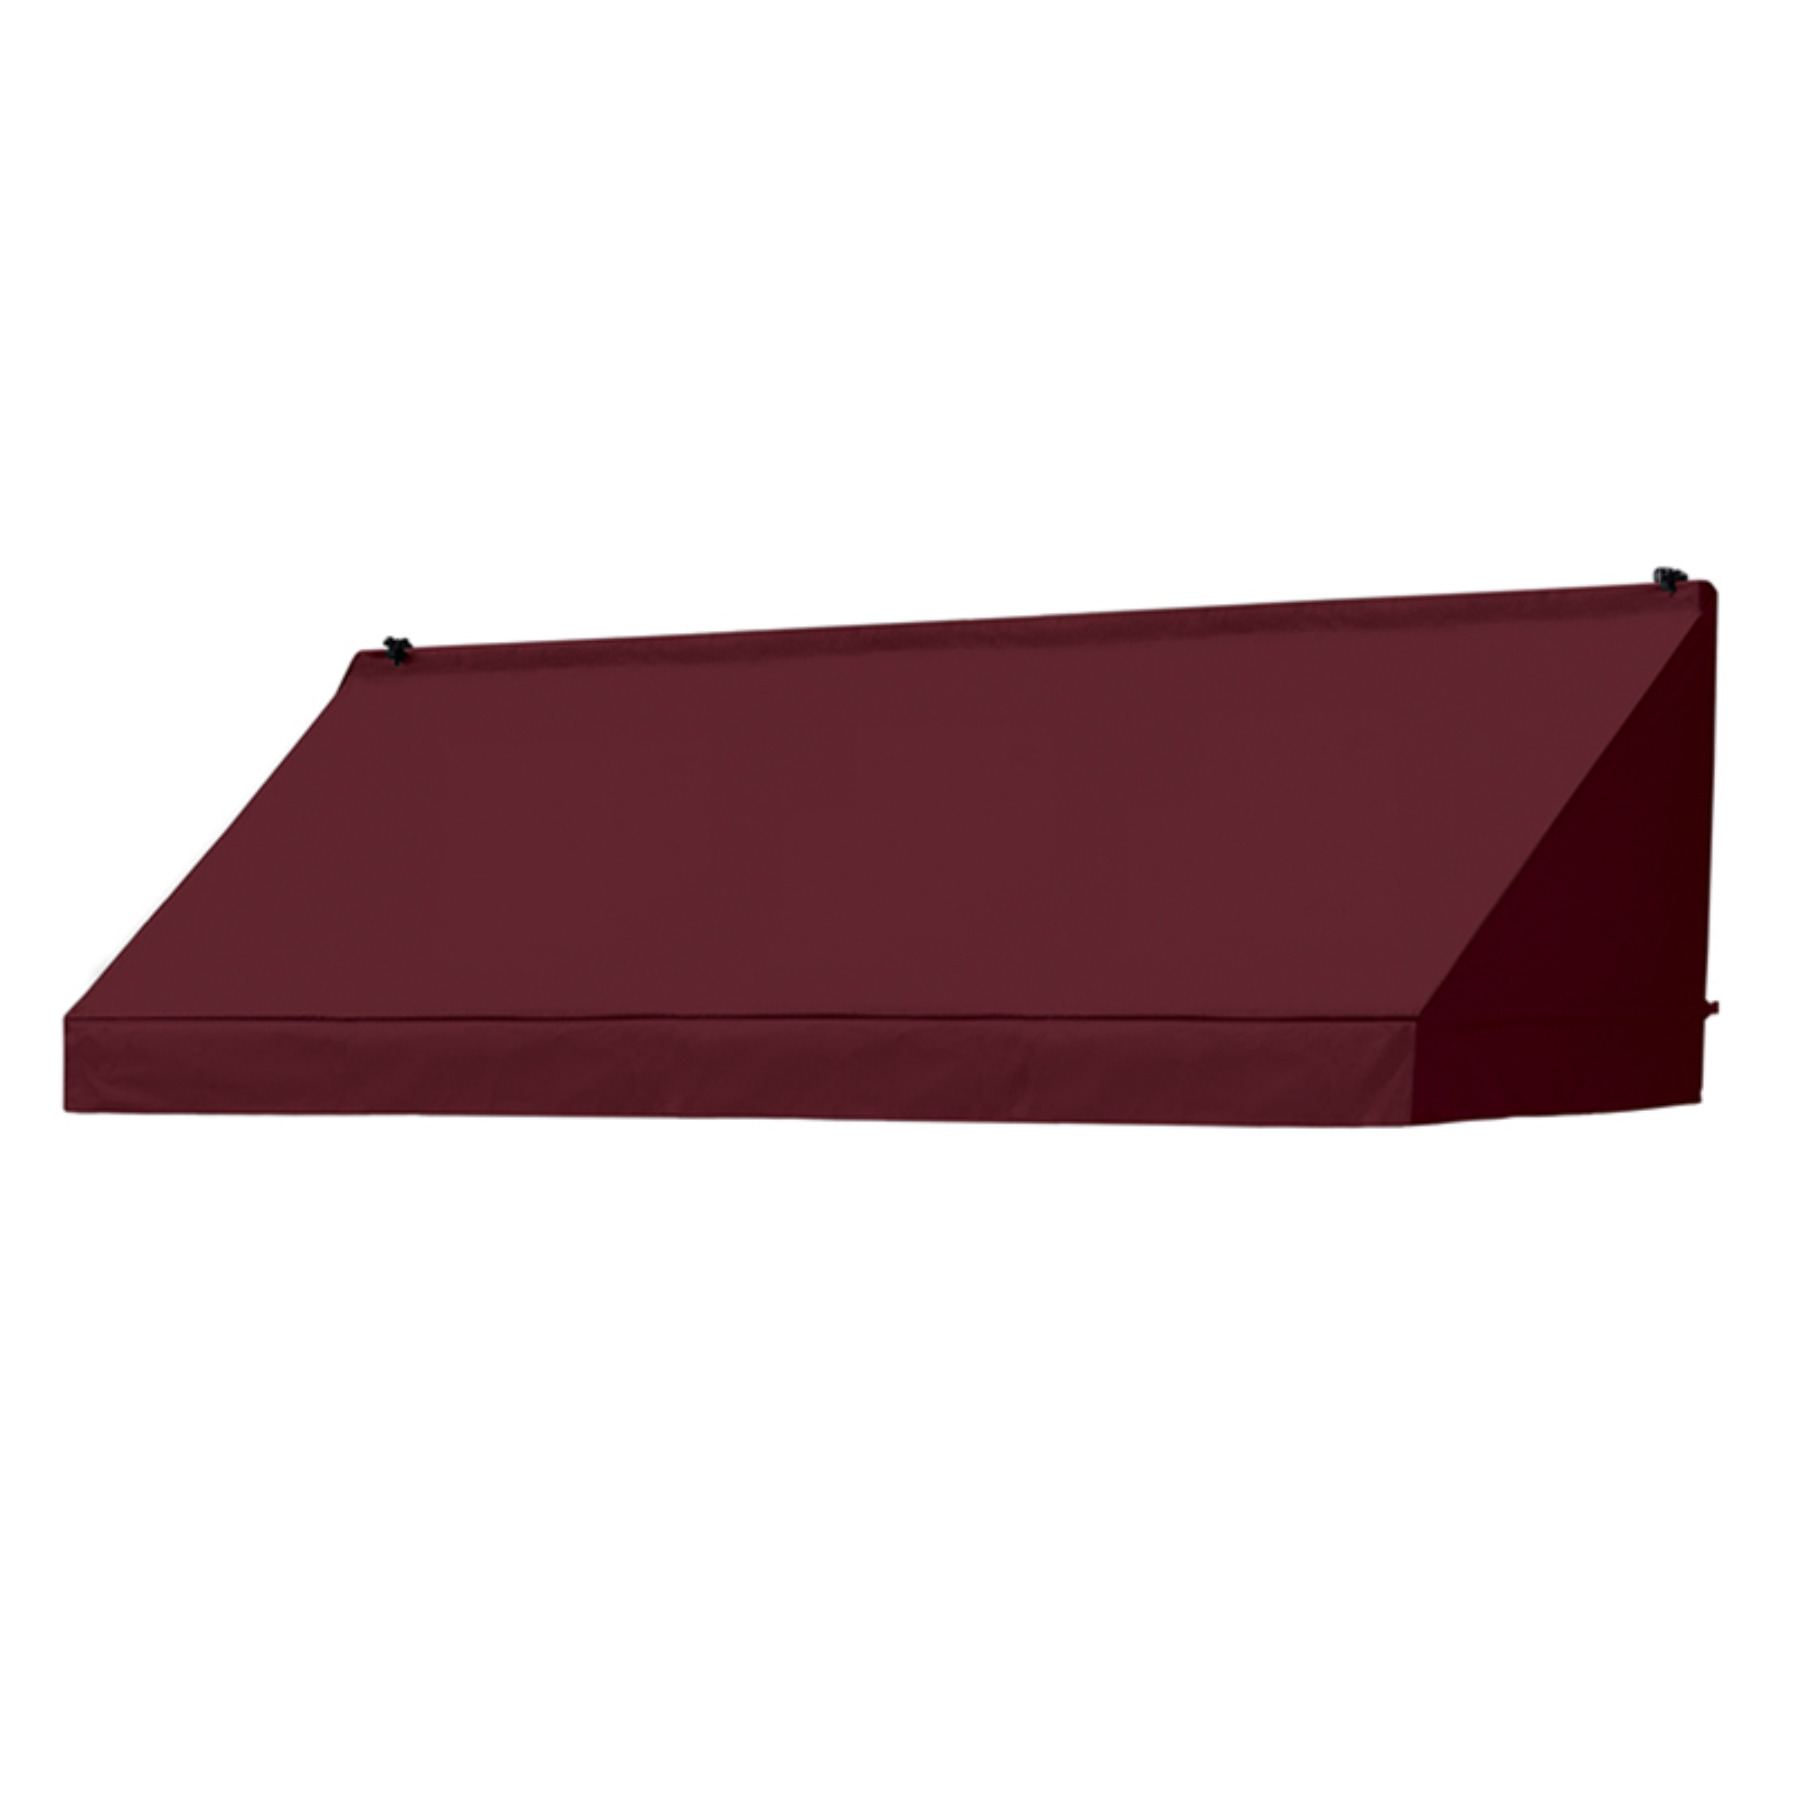 8' Traditional Awnings in a Box, Burgundy